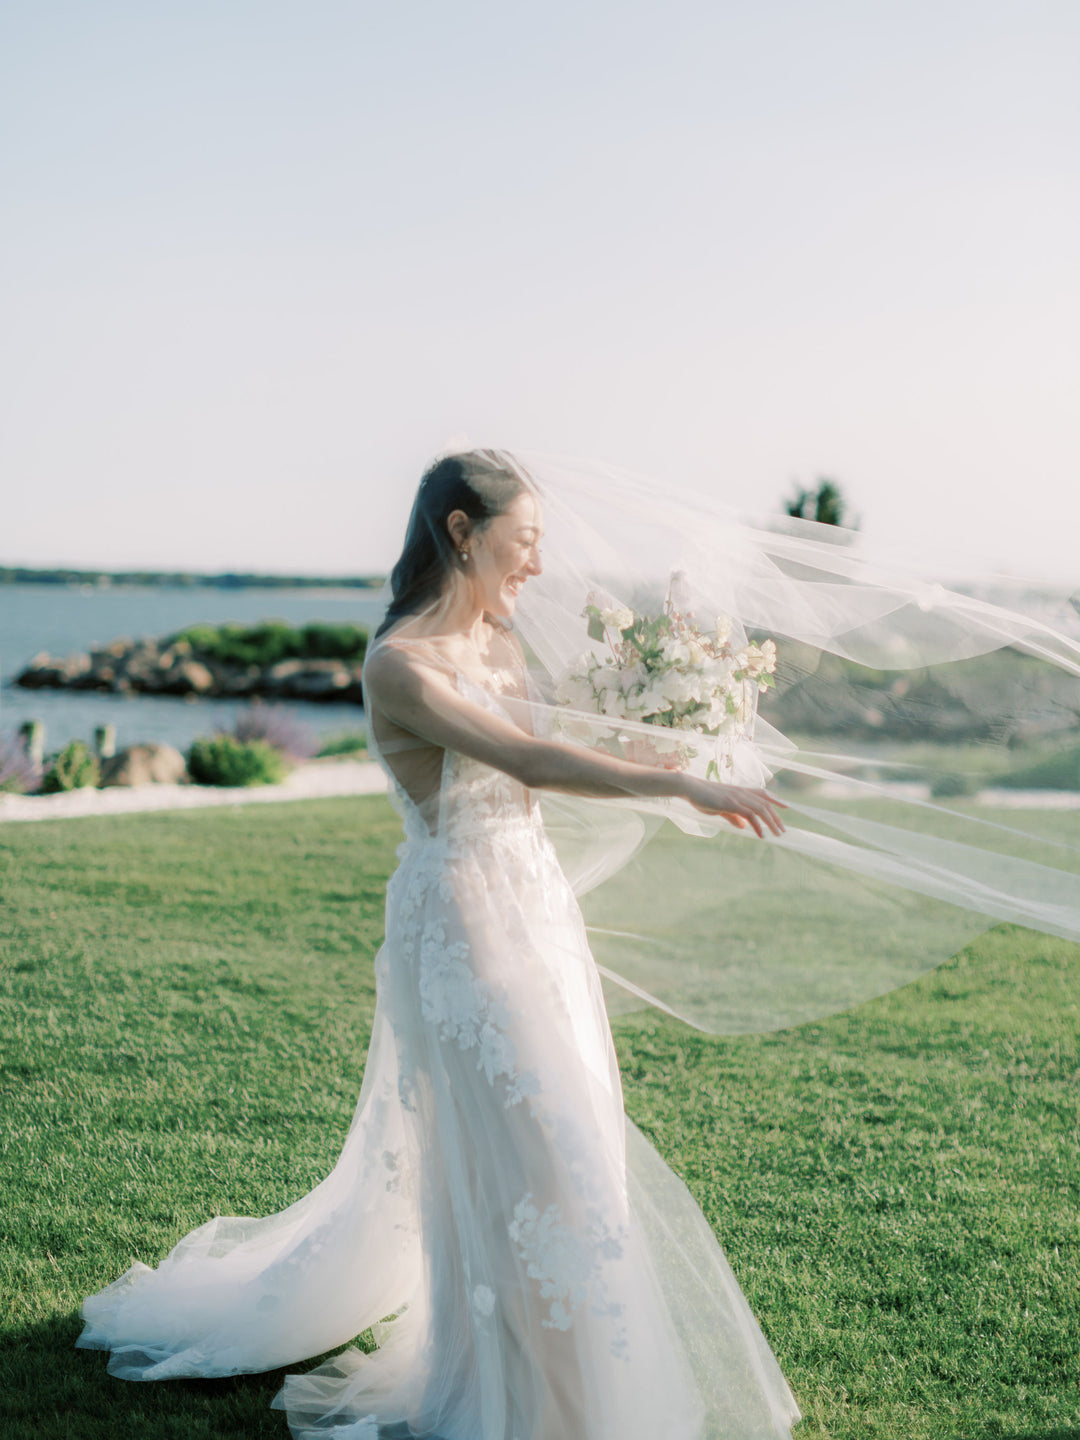 Bride with wedding veil in the wind.